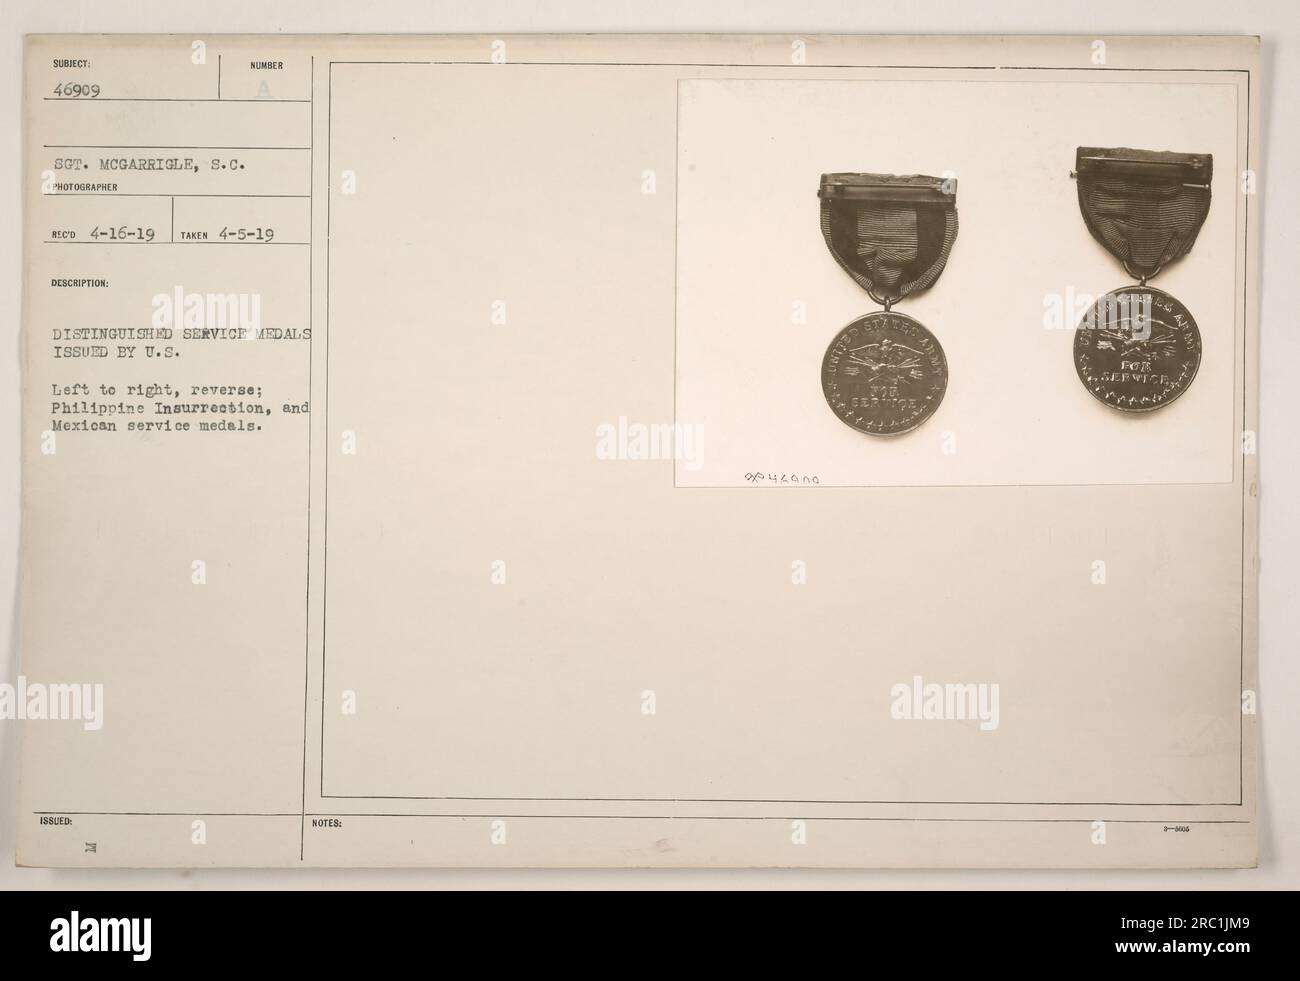 Group of distinguished service medals issued by the U.S. military, photographed by Rico on April 5, 1919. From left to right, the medals on display include the reverse side of the Philippine Insurrection medal and the Mexican service medal. Issued to Sgt. McGarrigle, identified as subject number 46909. Stock Photo